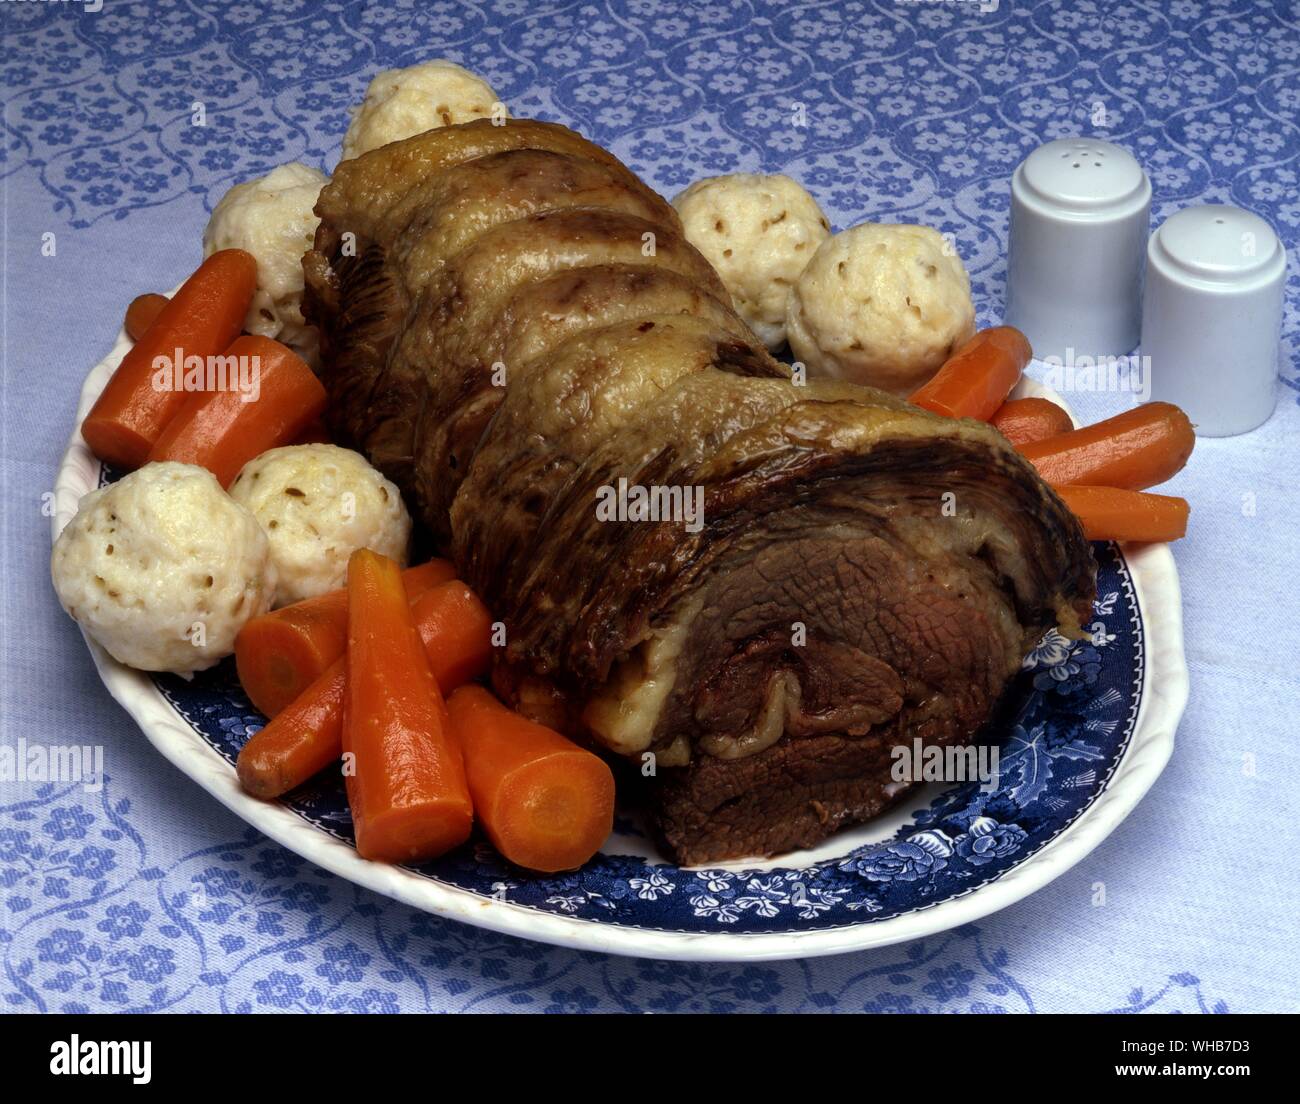 Boiled beef and carrots. Stock Photo